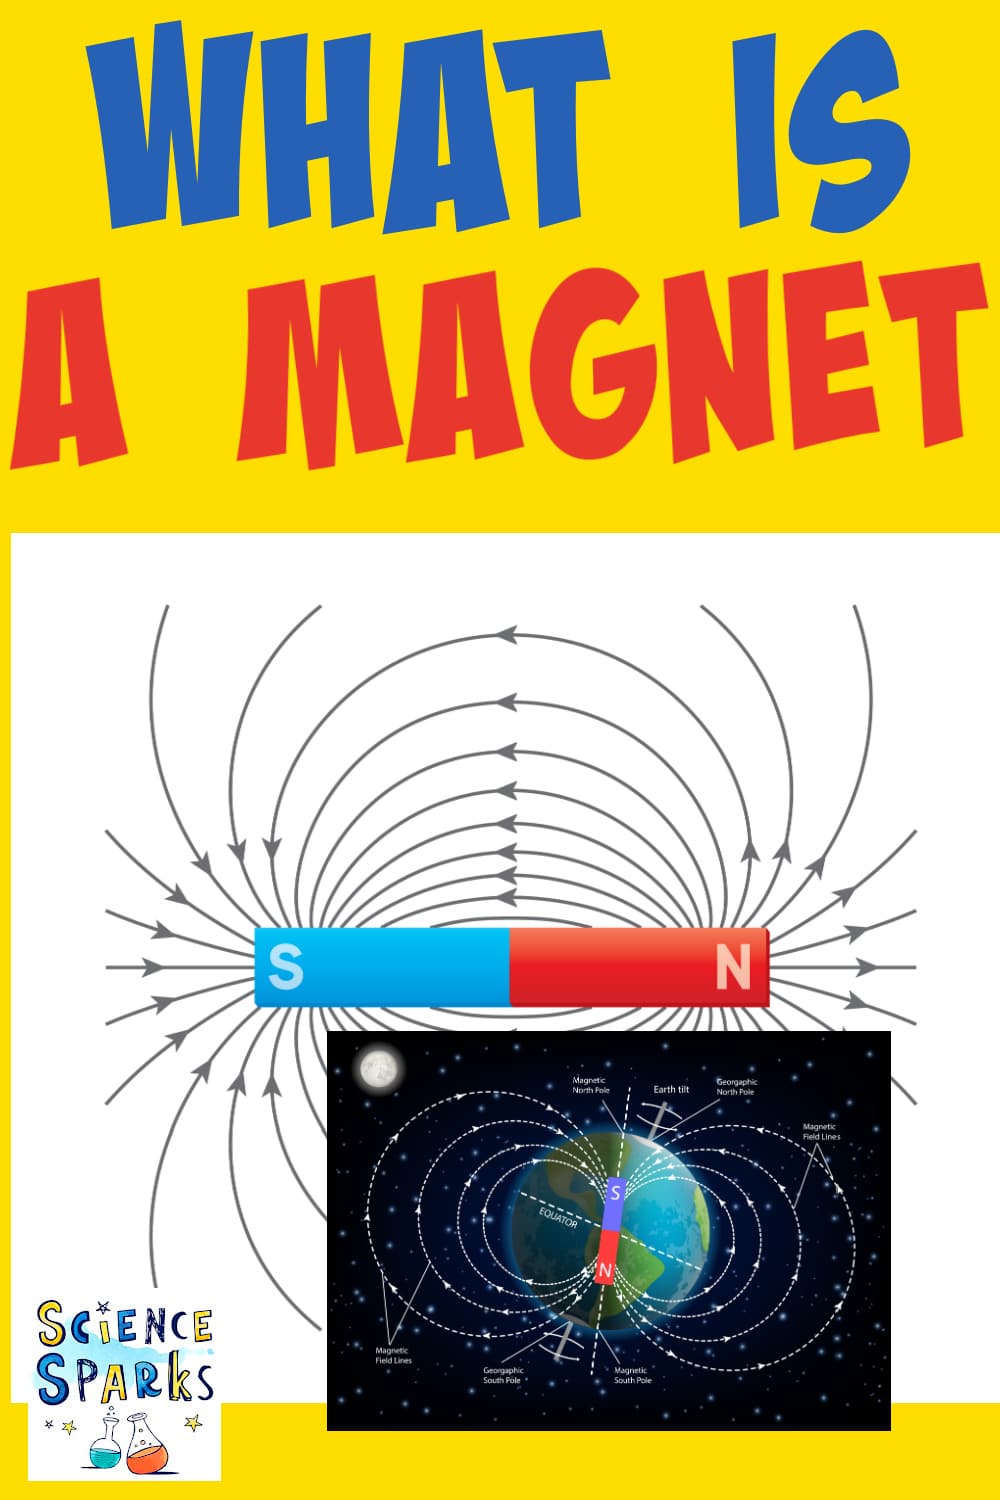 What is a magnet?